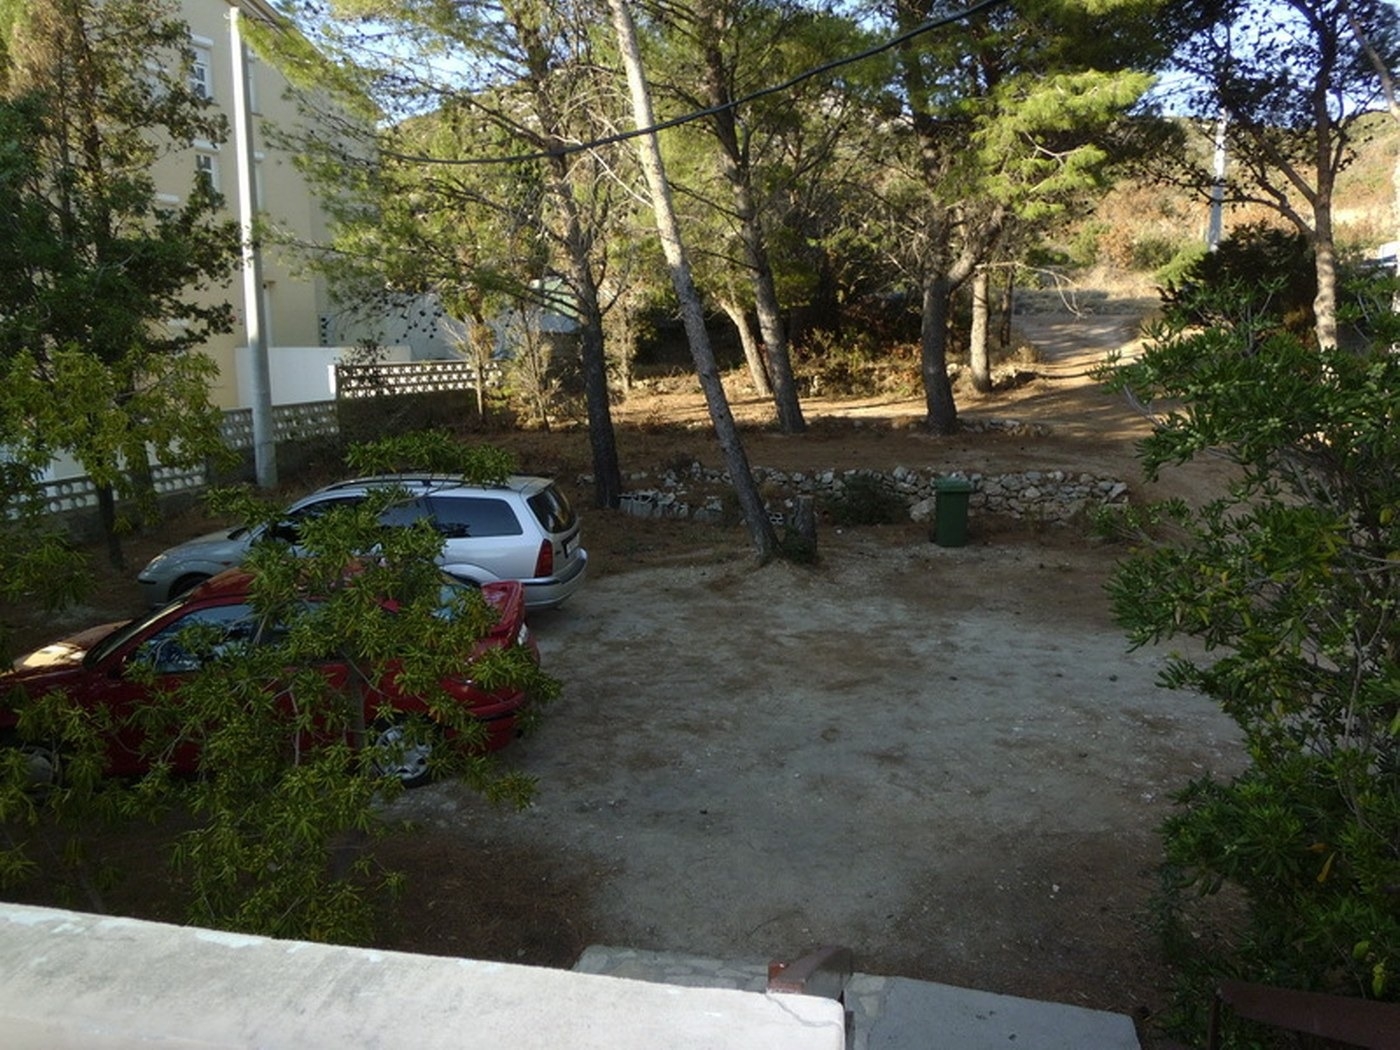 Apartment Ivan1 - 10m from the beach with parking: A1 Donji Stara Novalja, Island Pag 2